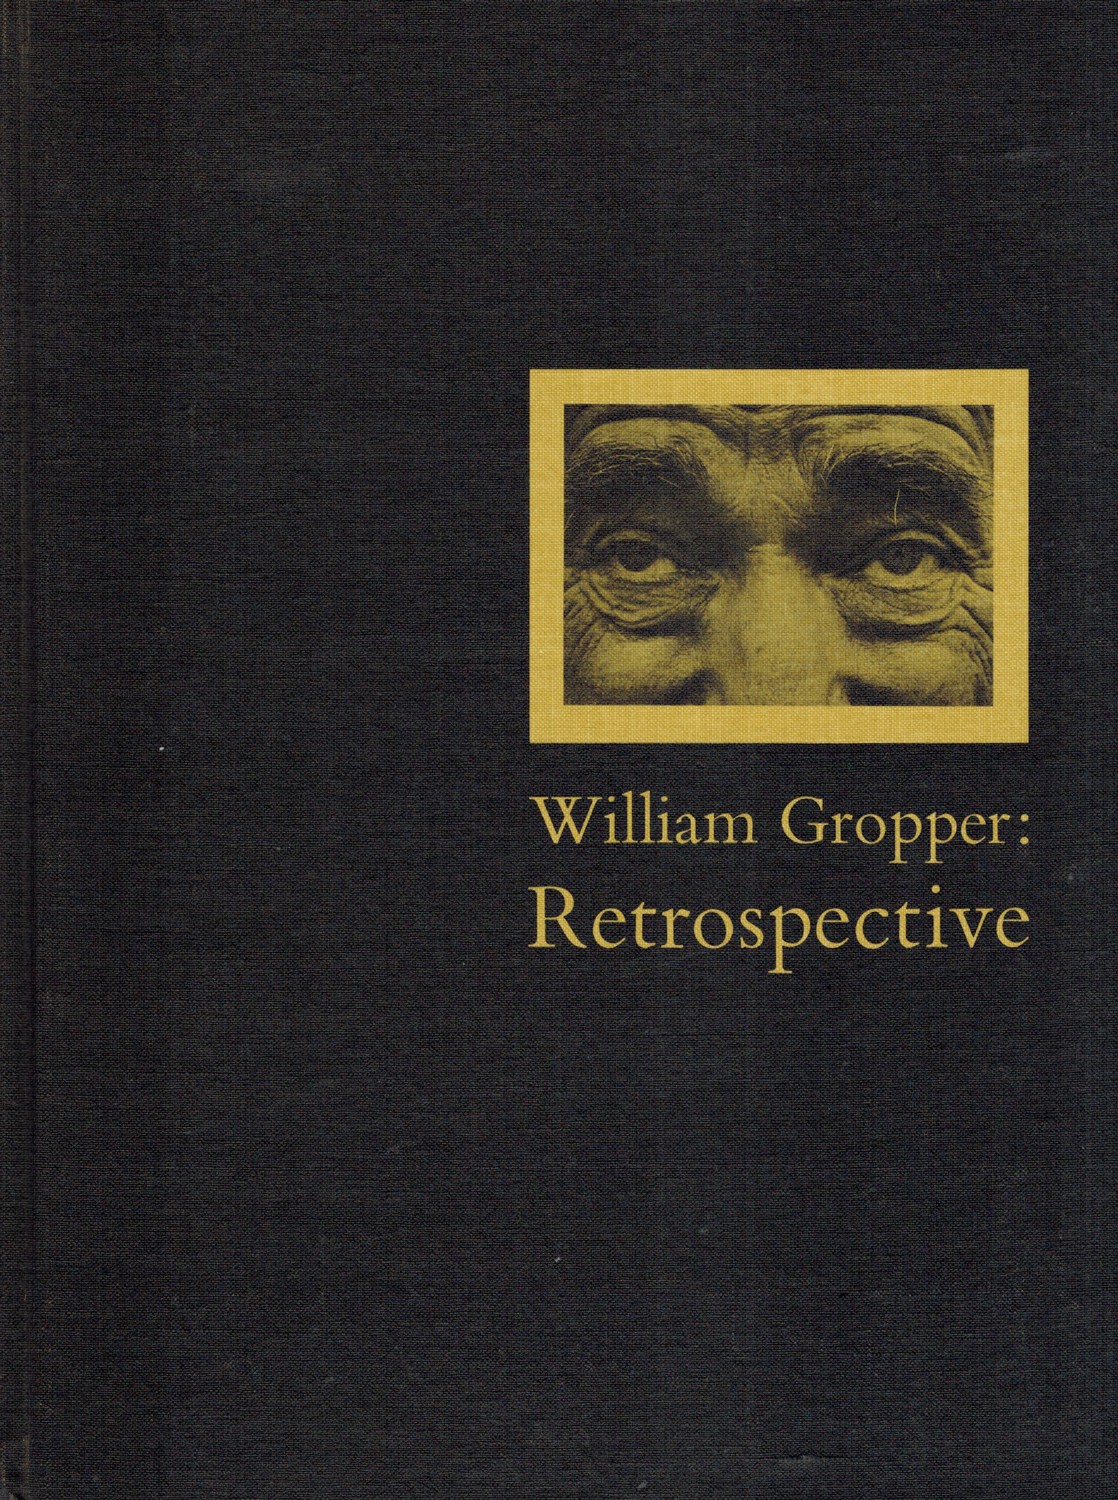 (GROPPER, WILLIAM). Freundlich, August L. & William Gropper - WILLIAM GROPPER: RETROSPECTIVE - DELUXE SLIPCASED EDITION WITH A SIGNED LITHOGRAPHED